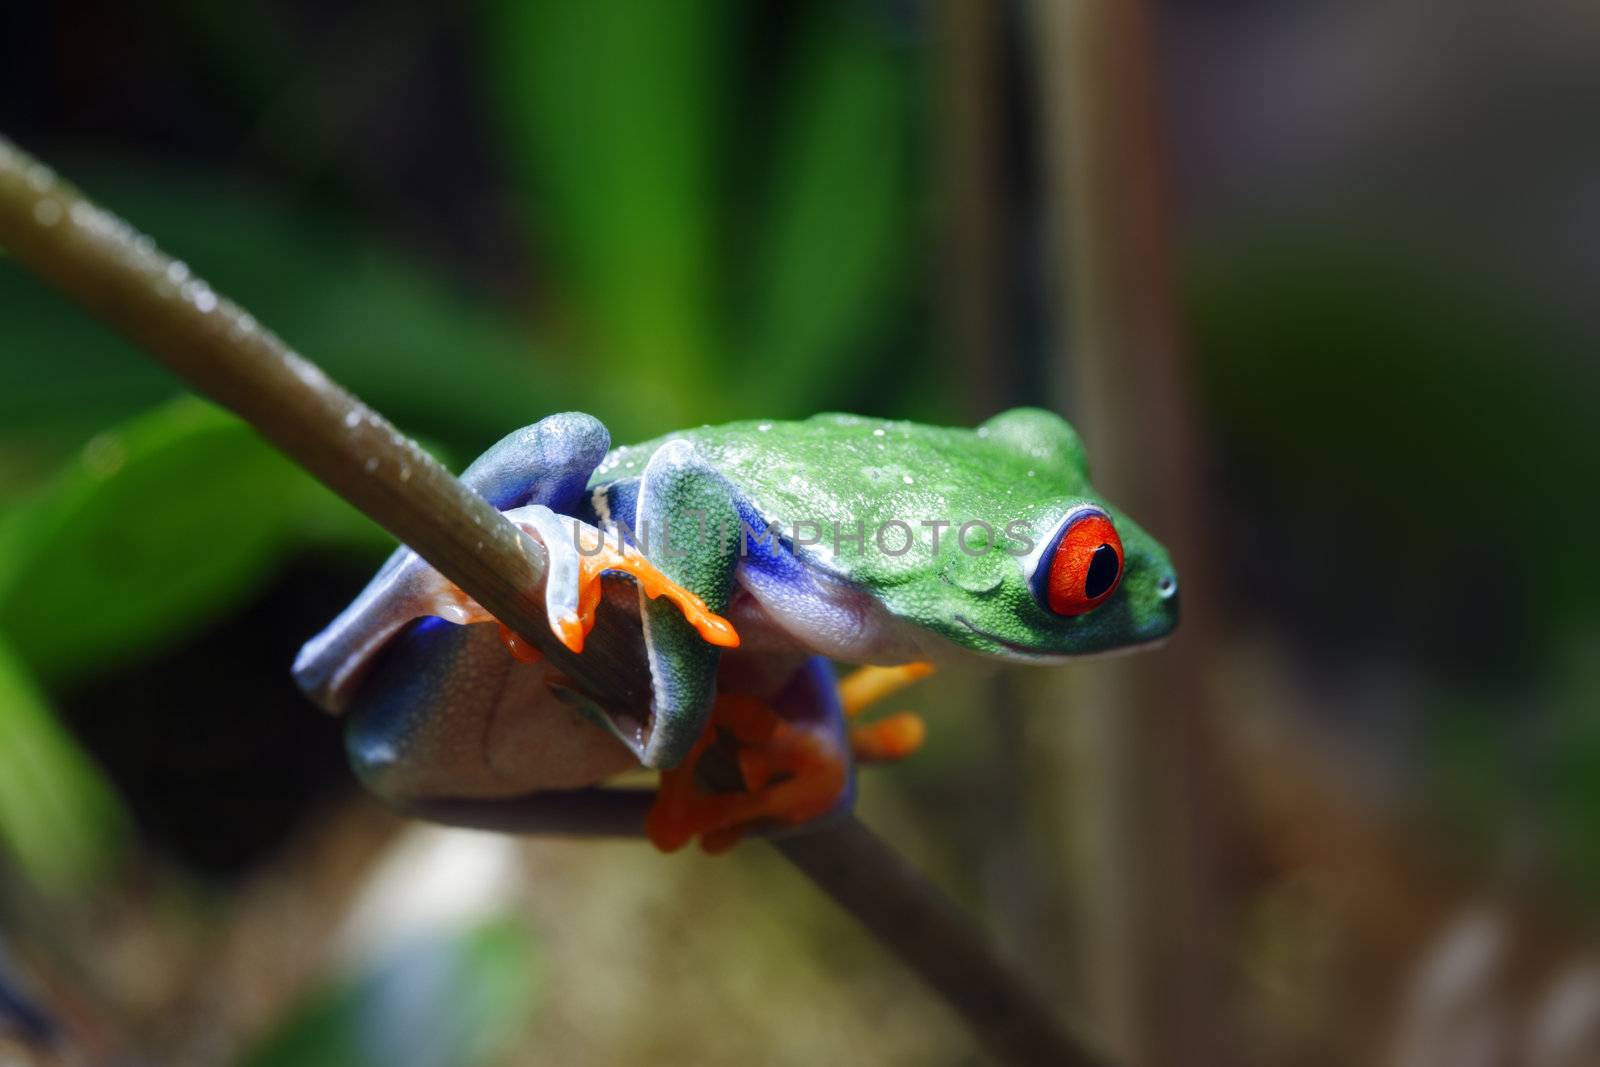 A beautifull and colorful Red-Eyed Tree Frog (Agalychnis callidryas) sitting along the stem of a plant in its tropical setting. 